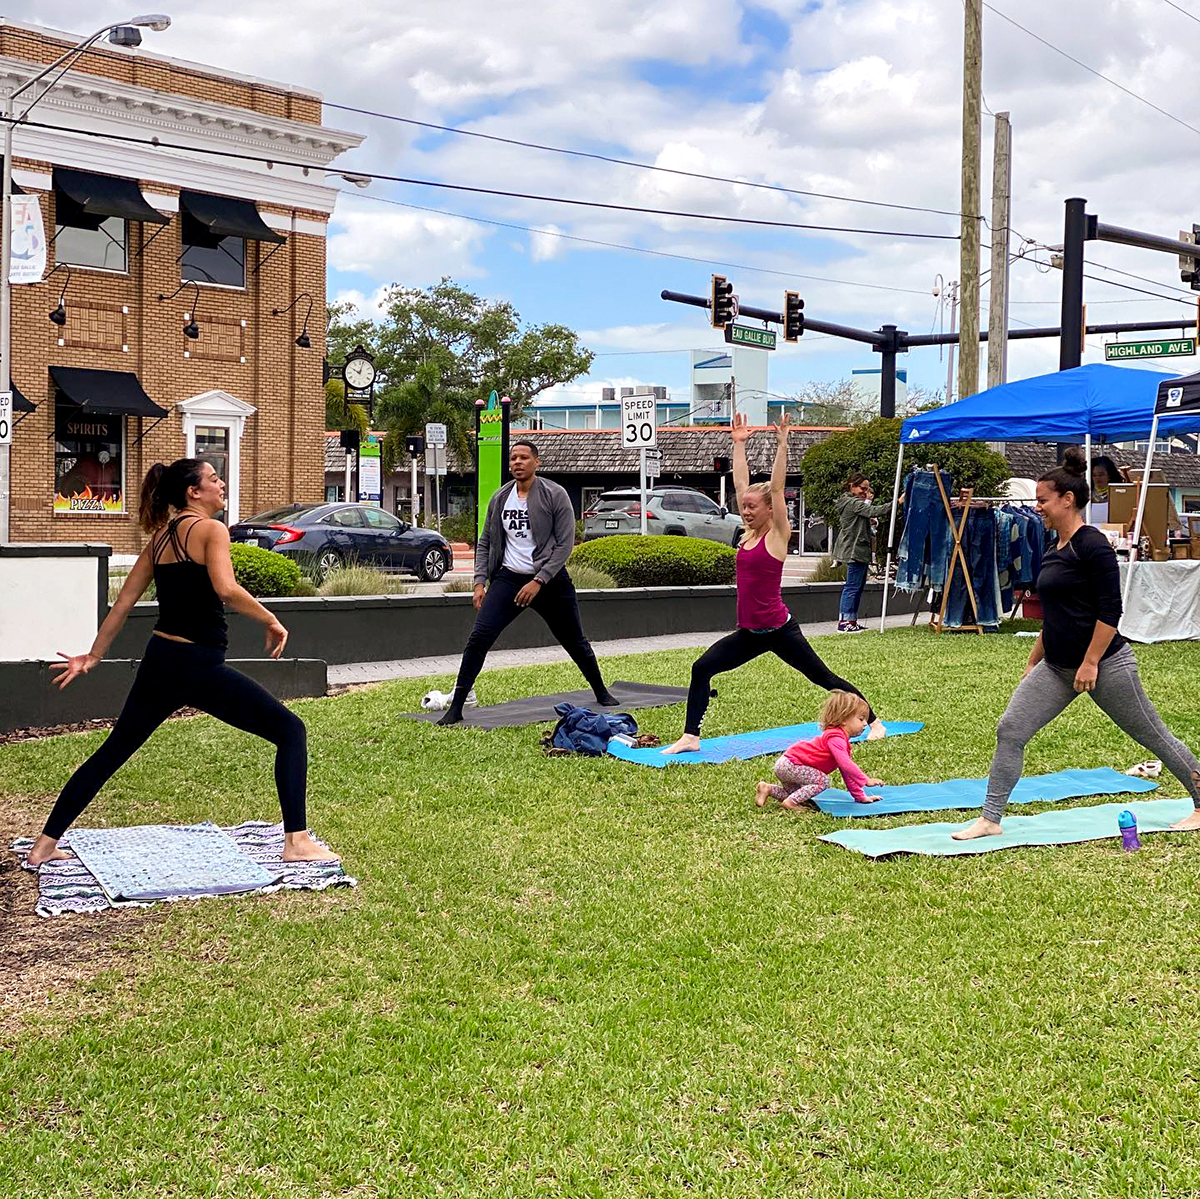 Yoga is never boring at Eau Gallie Square. 